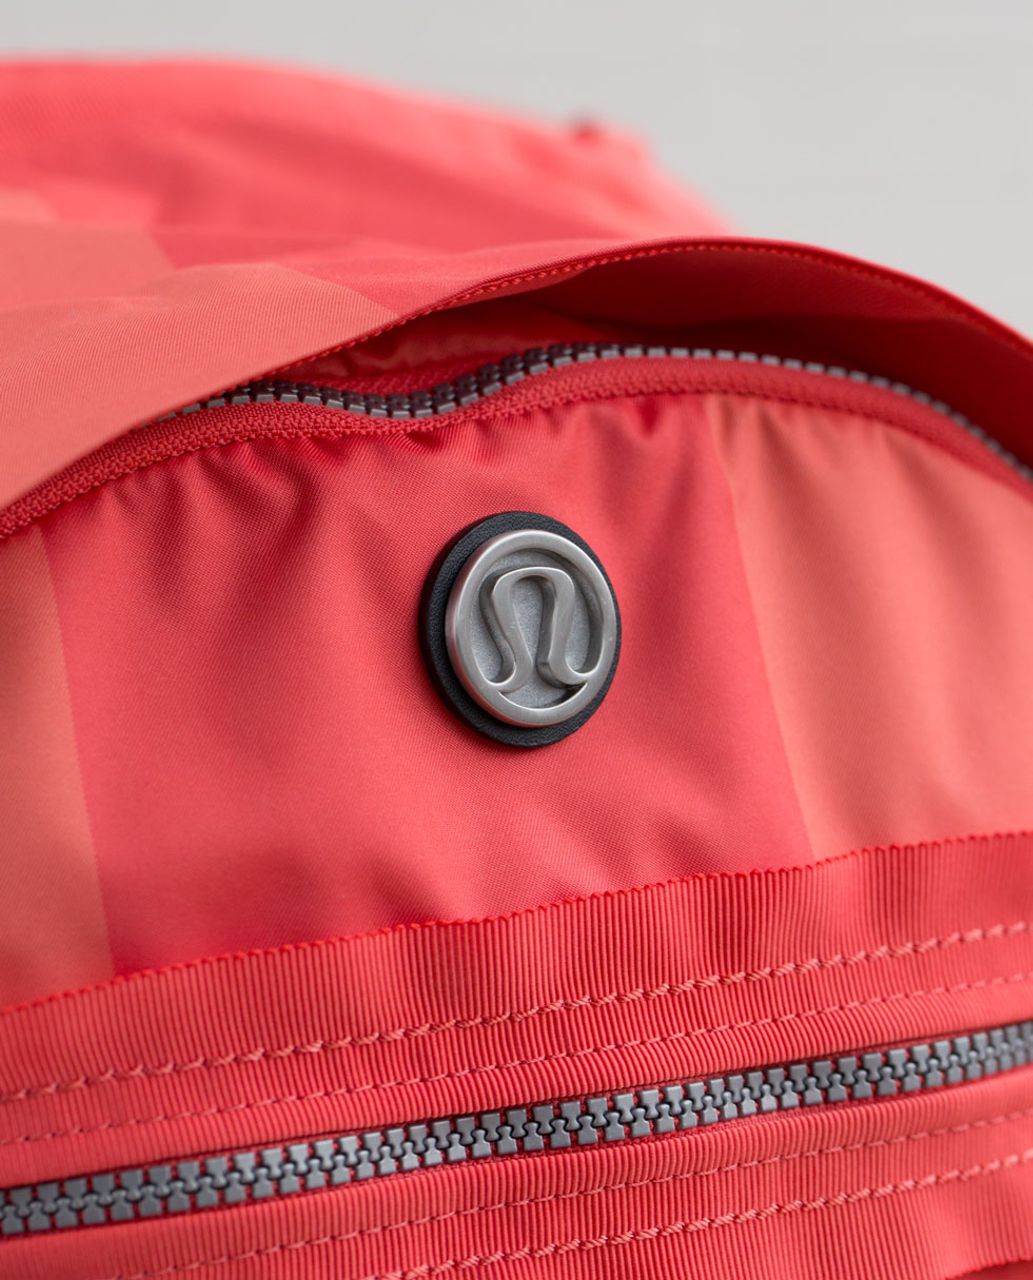 Lululemon Pack To Reality Backpack - Bold Stripe Atomic Red Plum Peach / Deep Coal